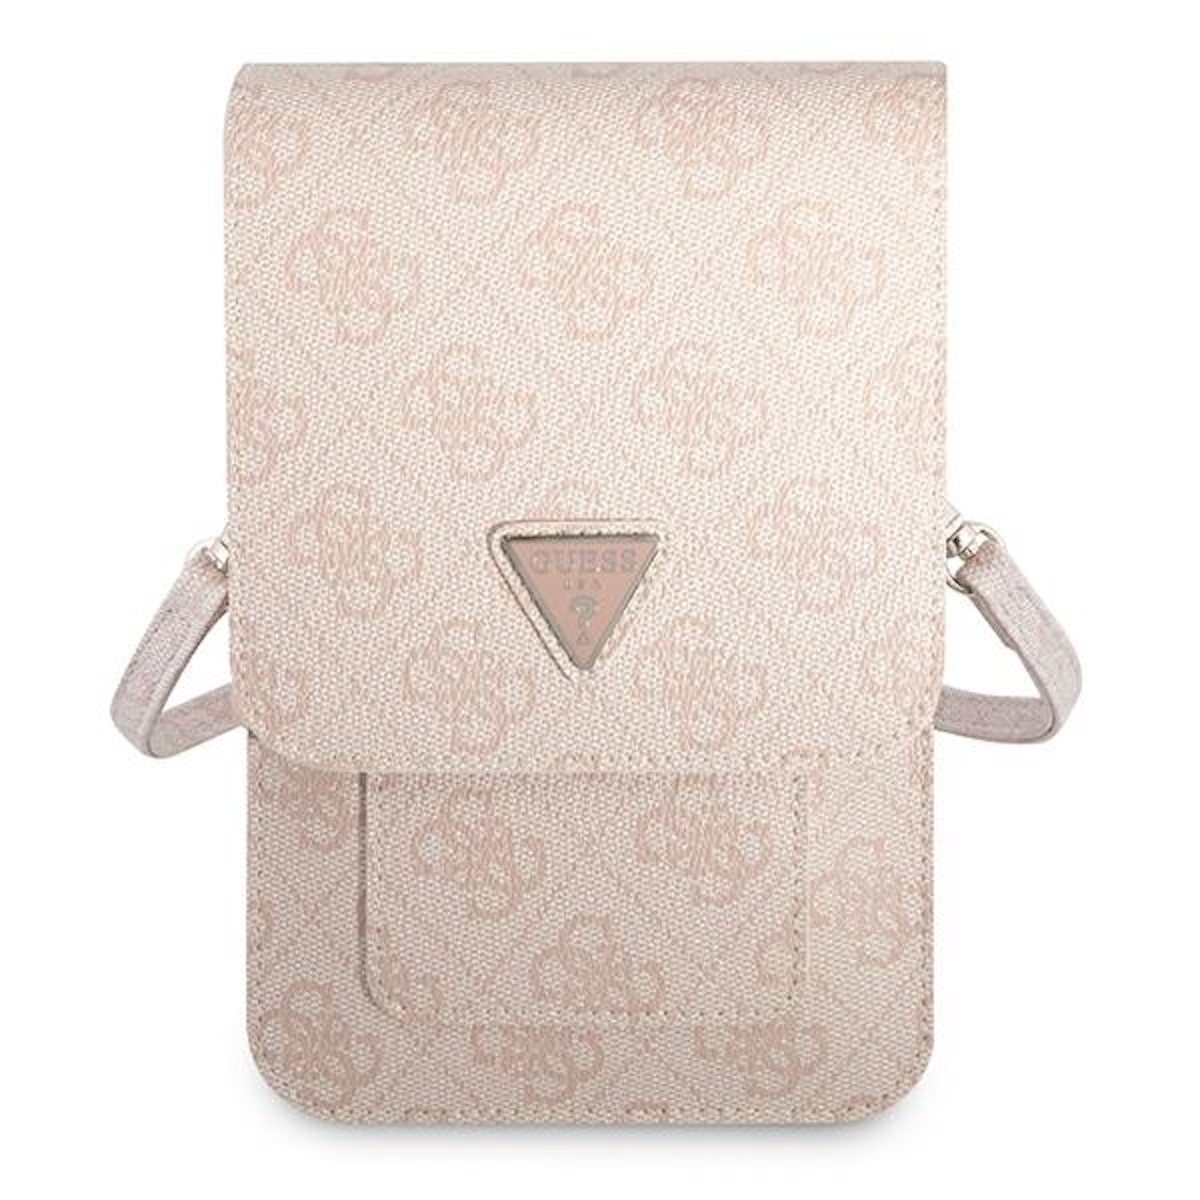 GUESS Torebka Triangle Umhängetasche, Tasche, Rosa Universell, Full Cover, Universelle